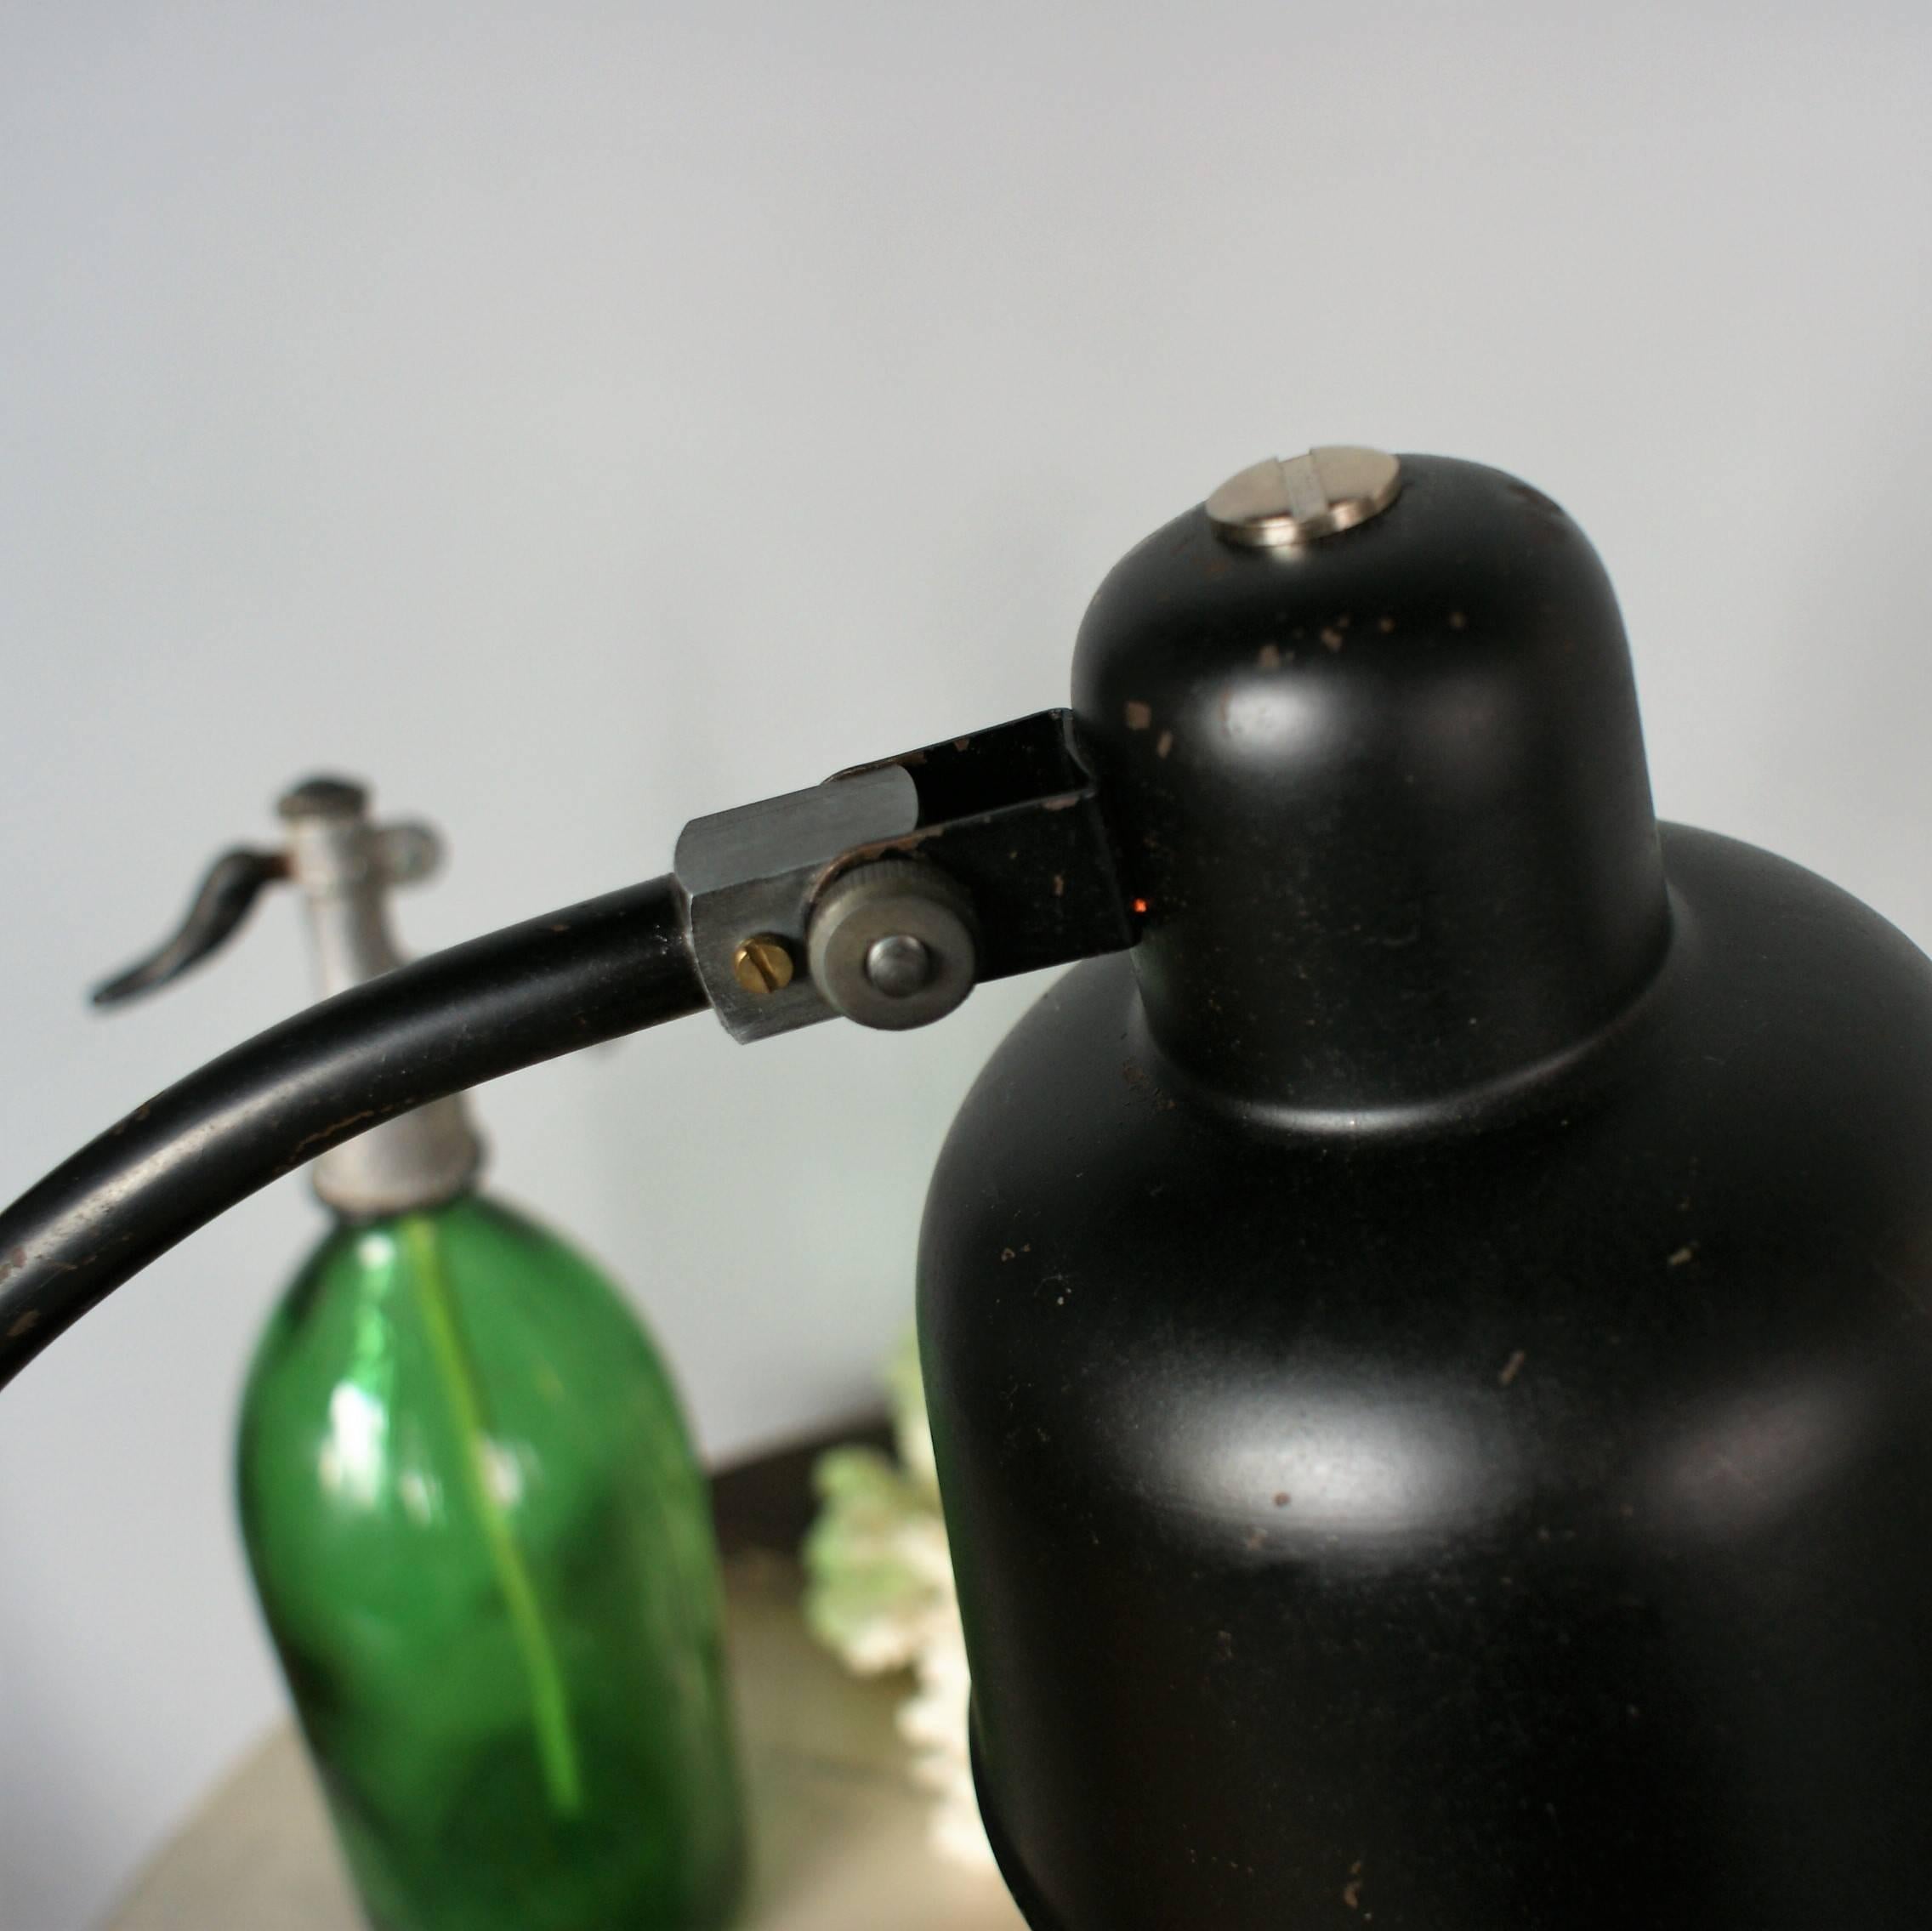 Steel Christian Dell Black Lacquered Bauhaus Table Lamp, 1930s Germany For Sale